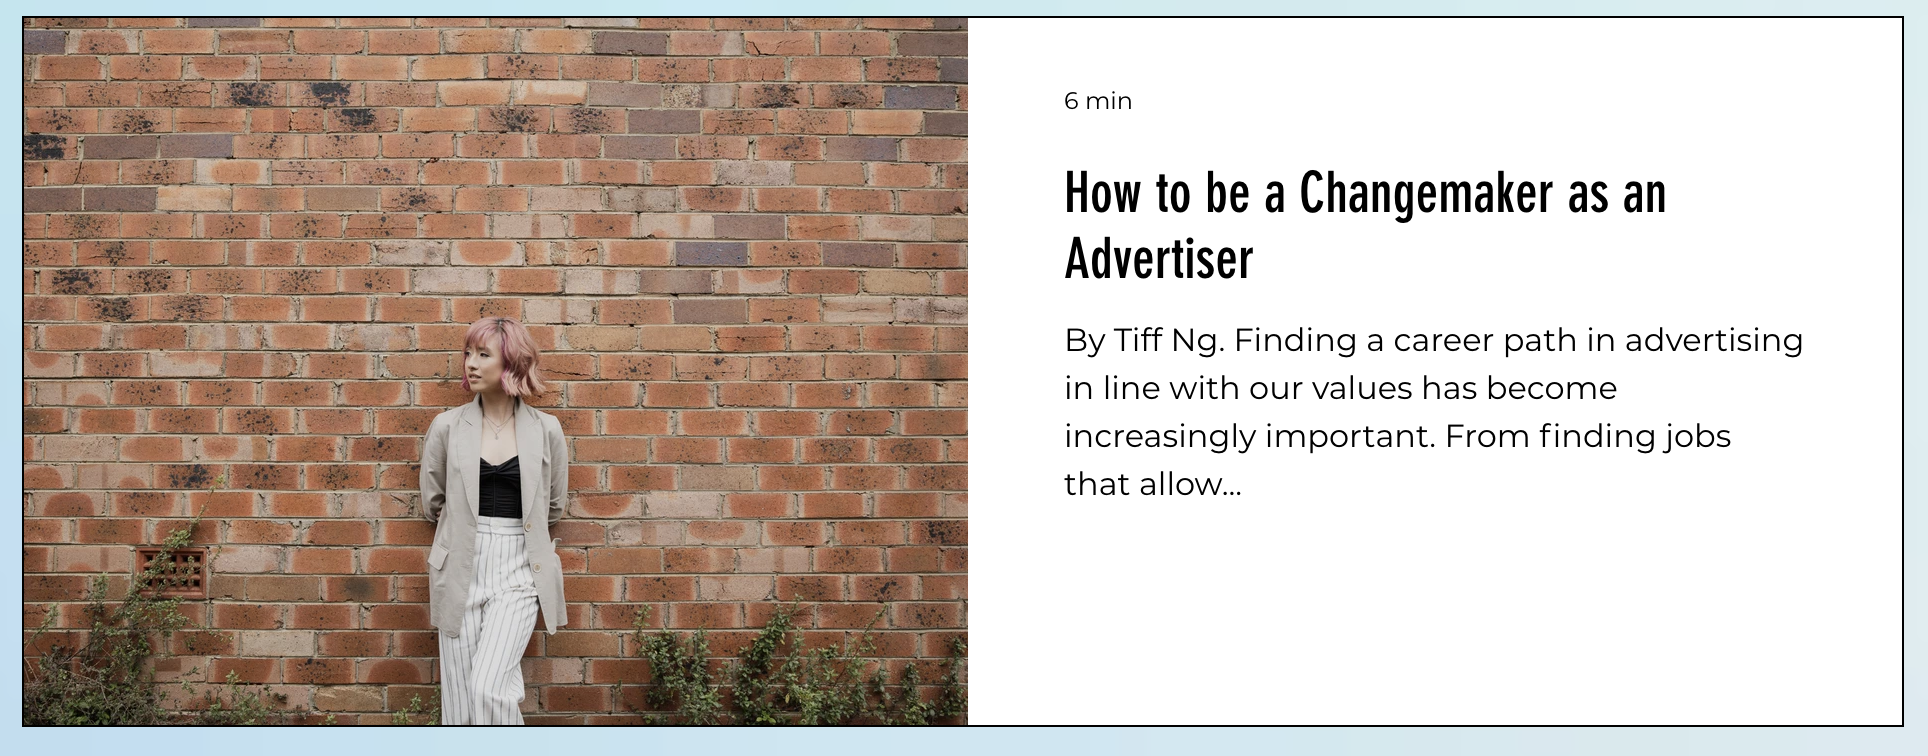 On the left, an image of a girl with pink hair leans against a brick wall, looking to the side. On the right is the title, 'How to be a Changemaker as an Advertiser' with a short blurb preview of the article.